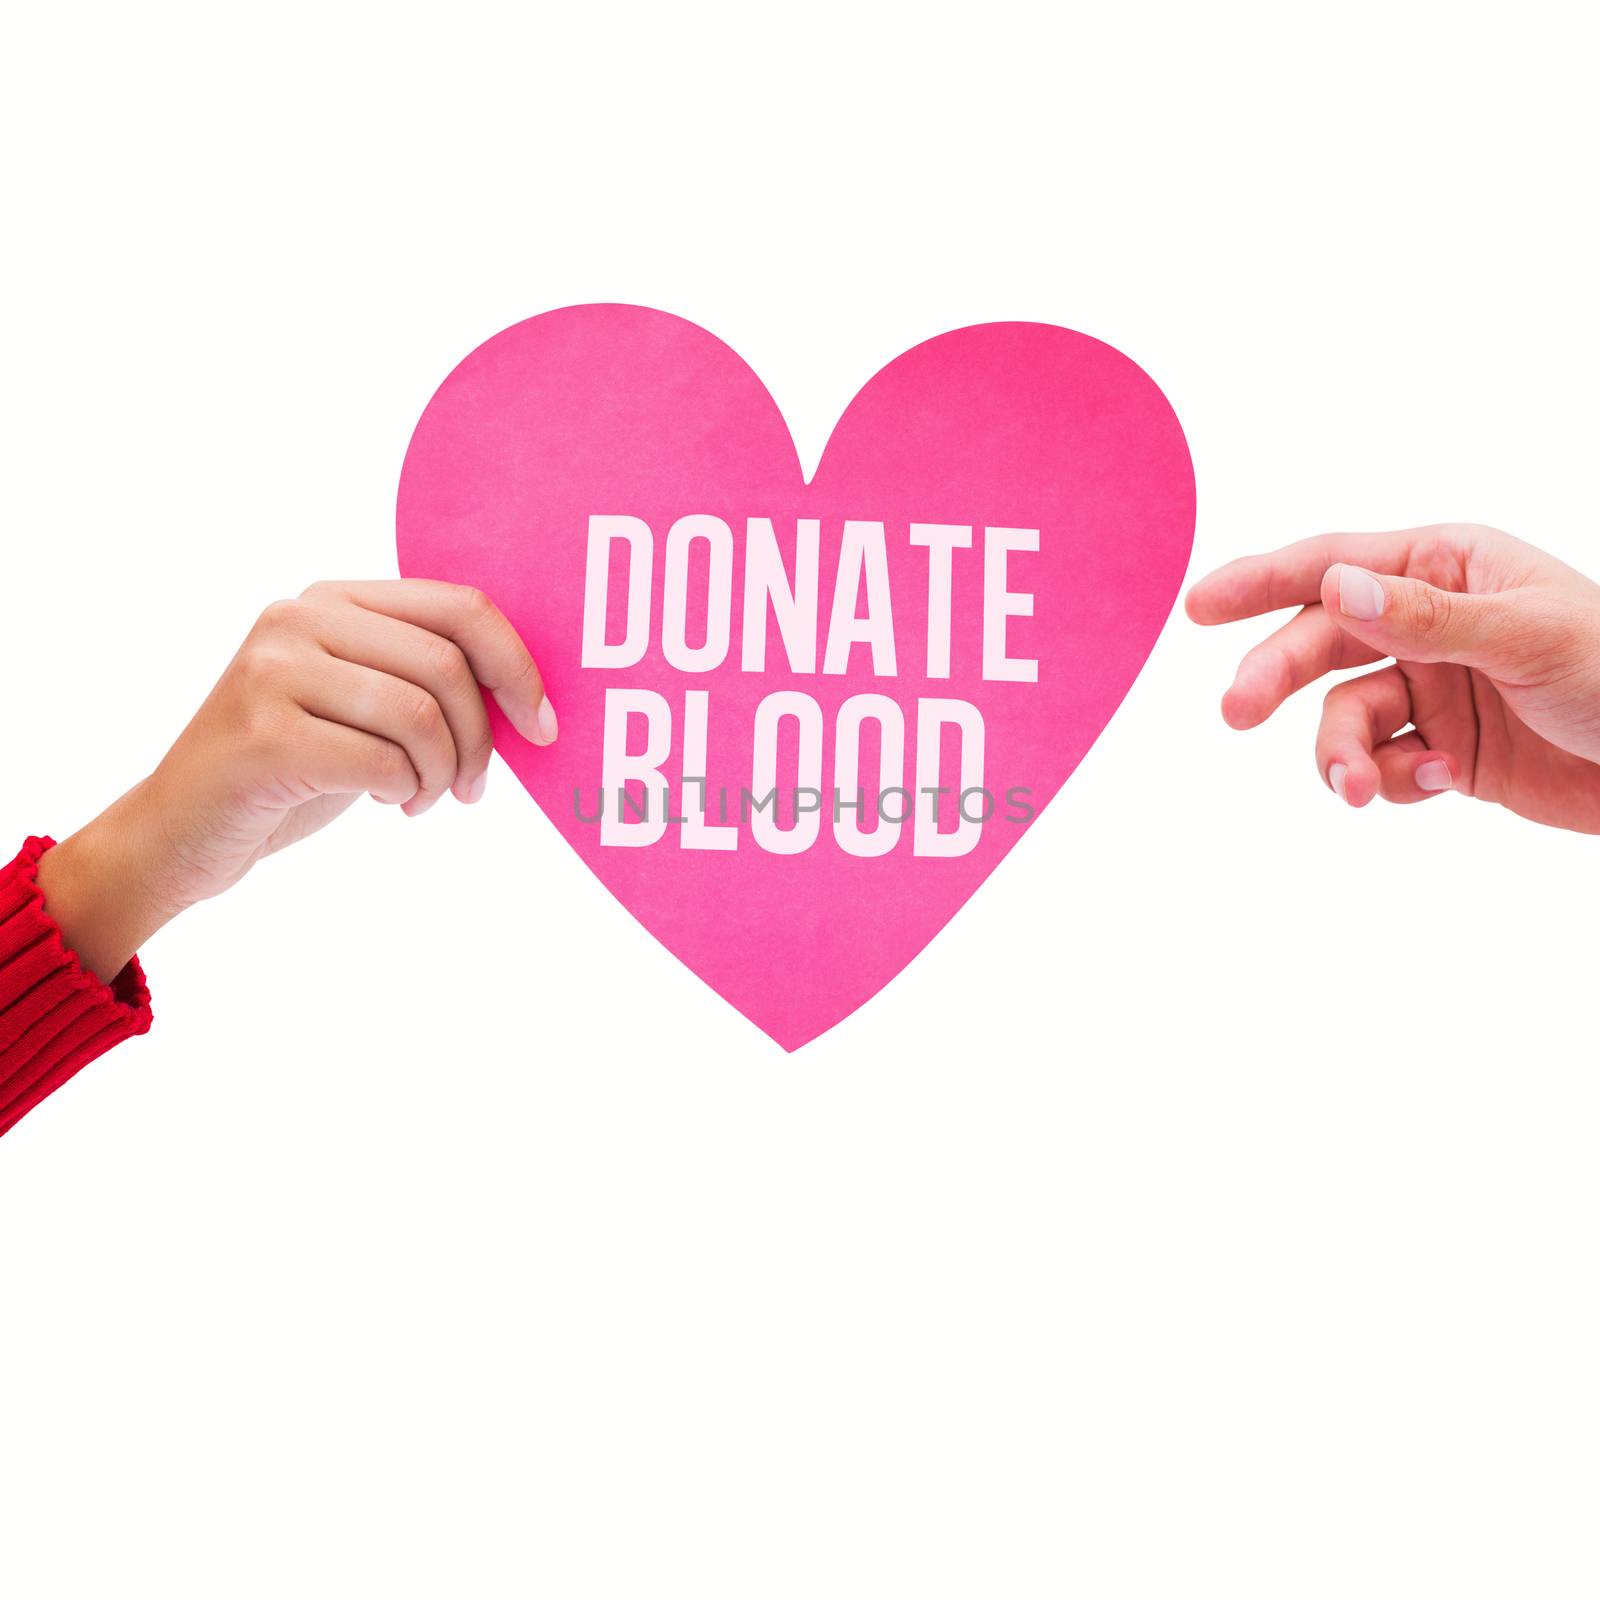 Couple holding a heart against donate blood